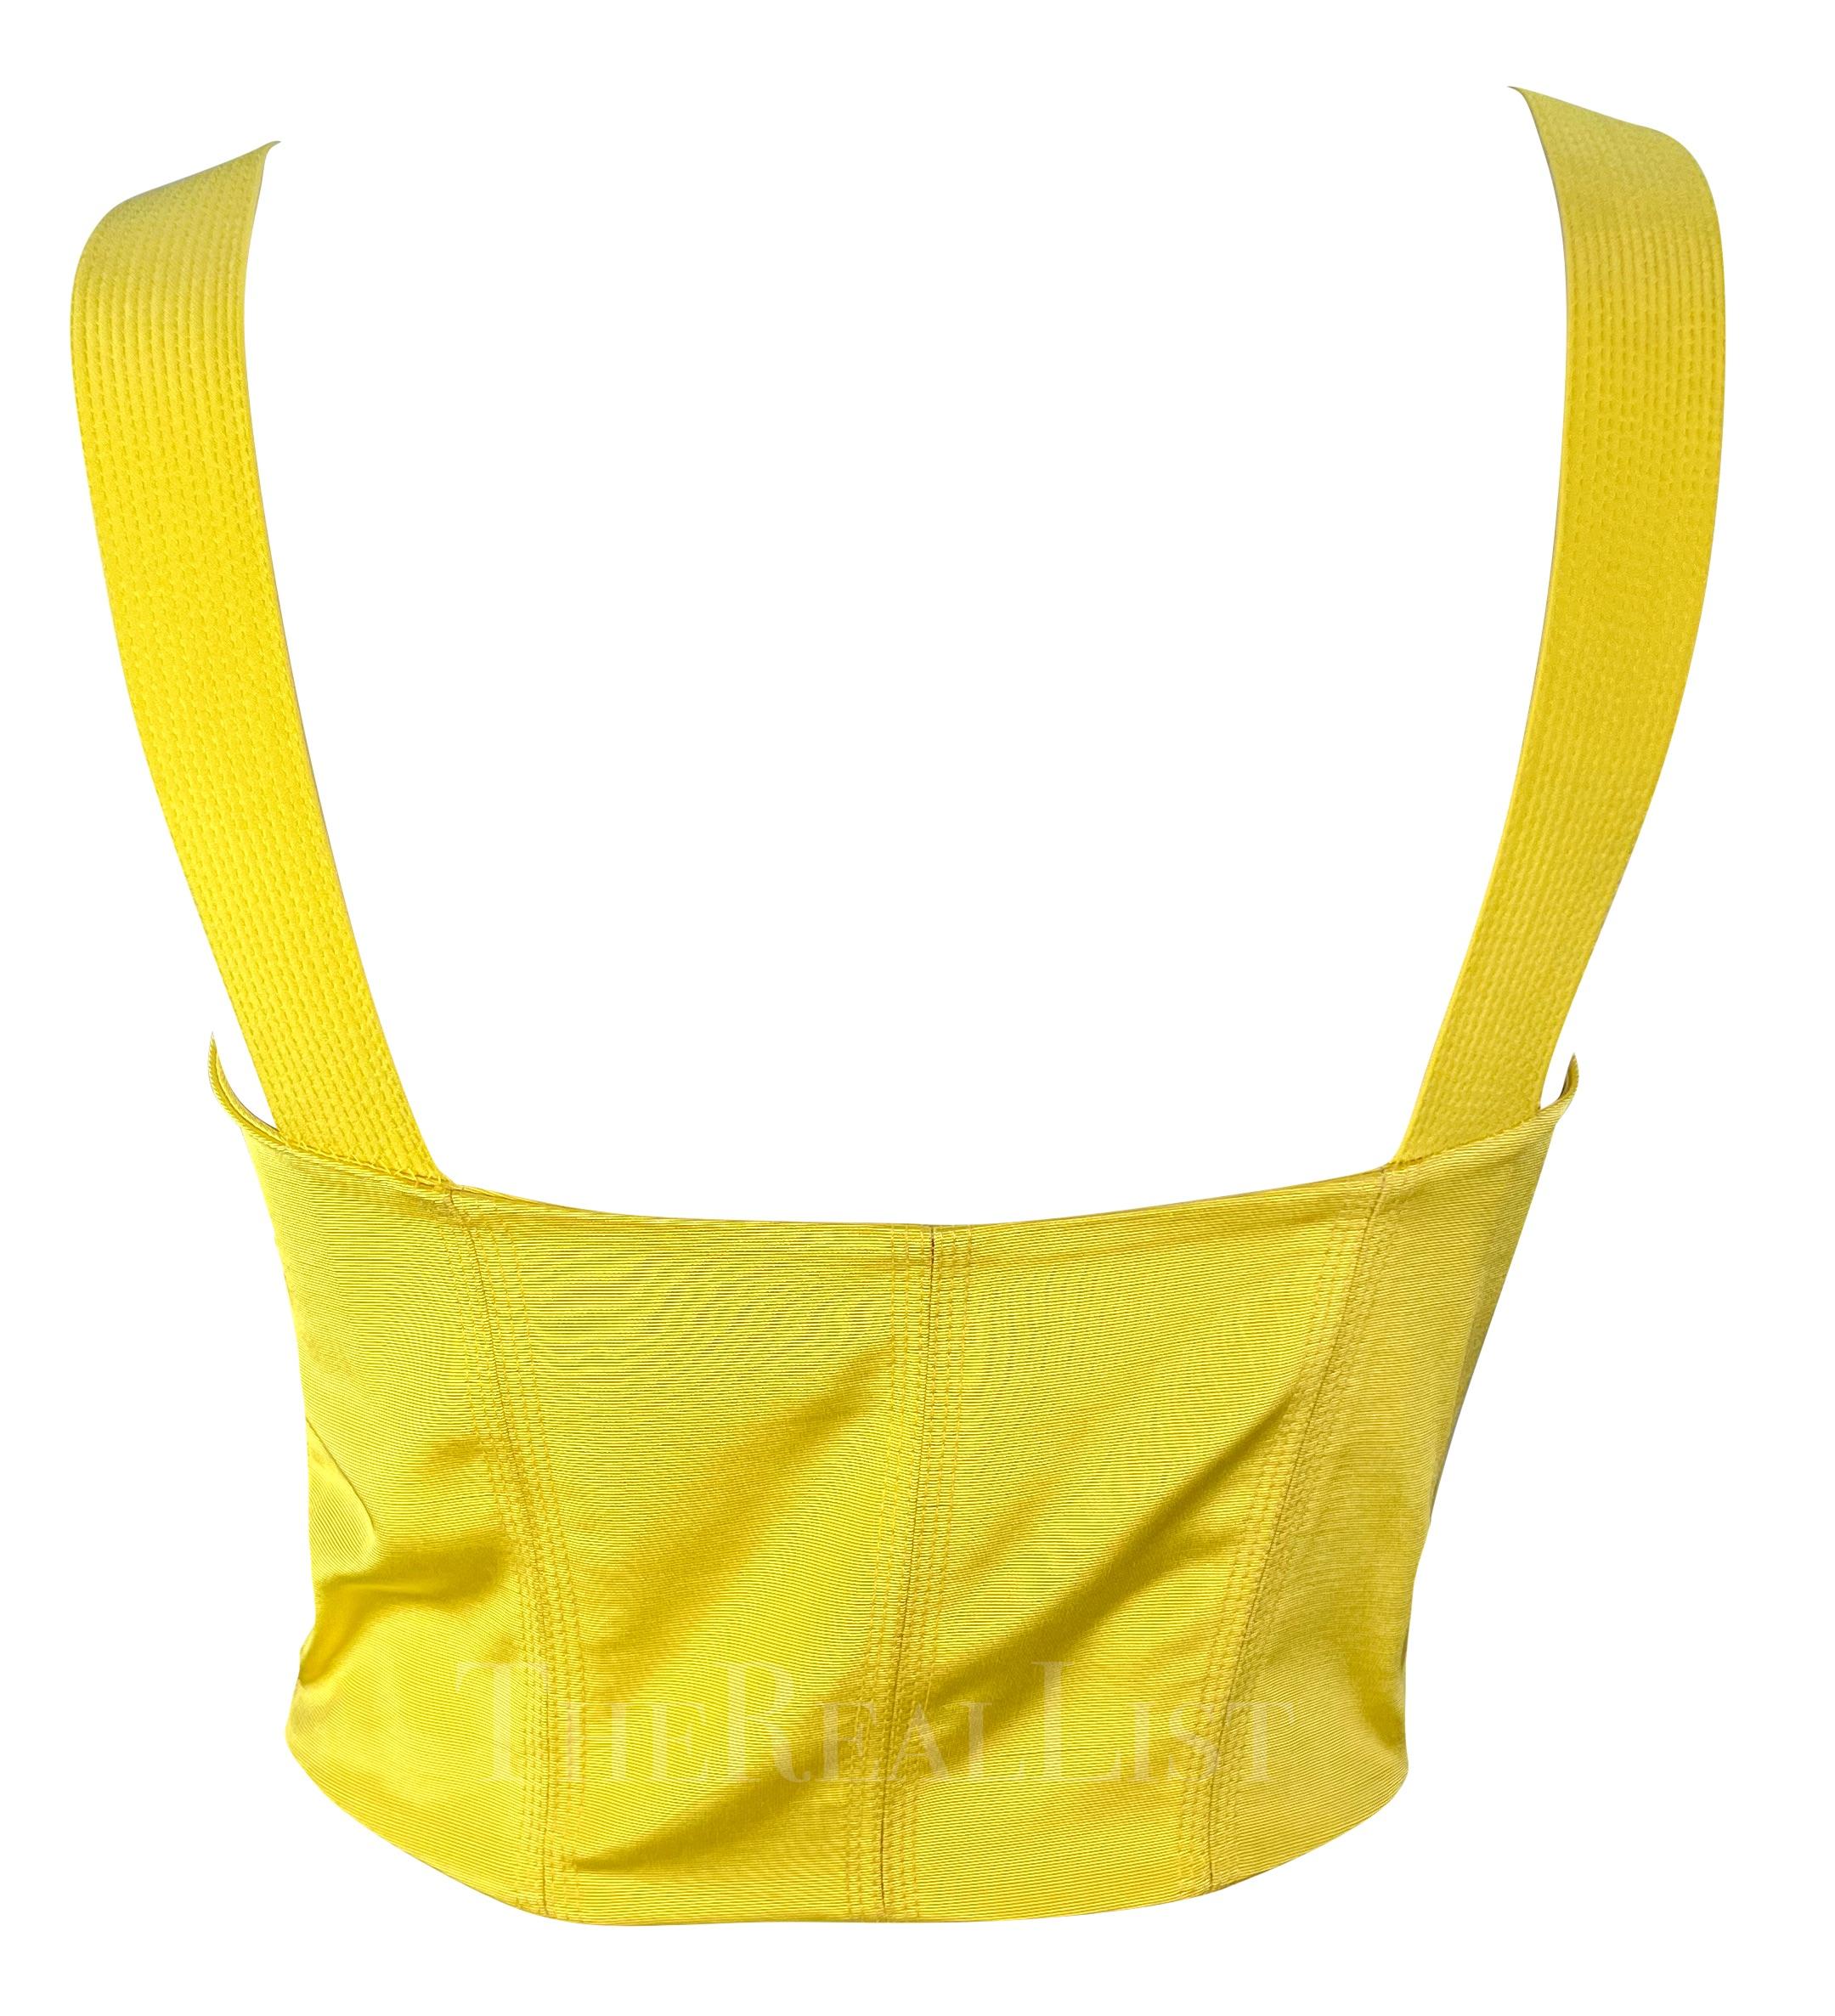 Women's S/S 1992 Gianni Versace Canary Yellow Bustier Crop Top For Sale